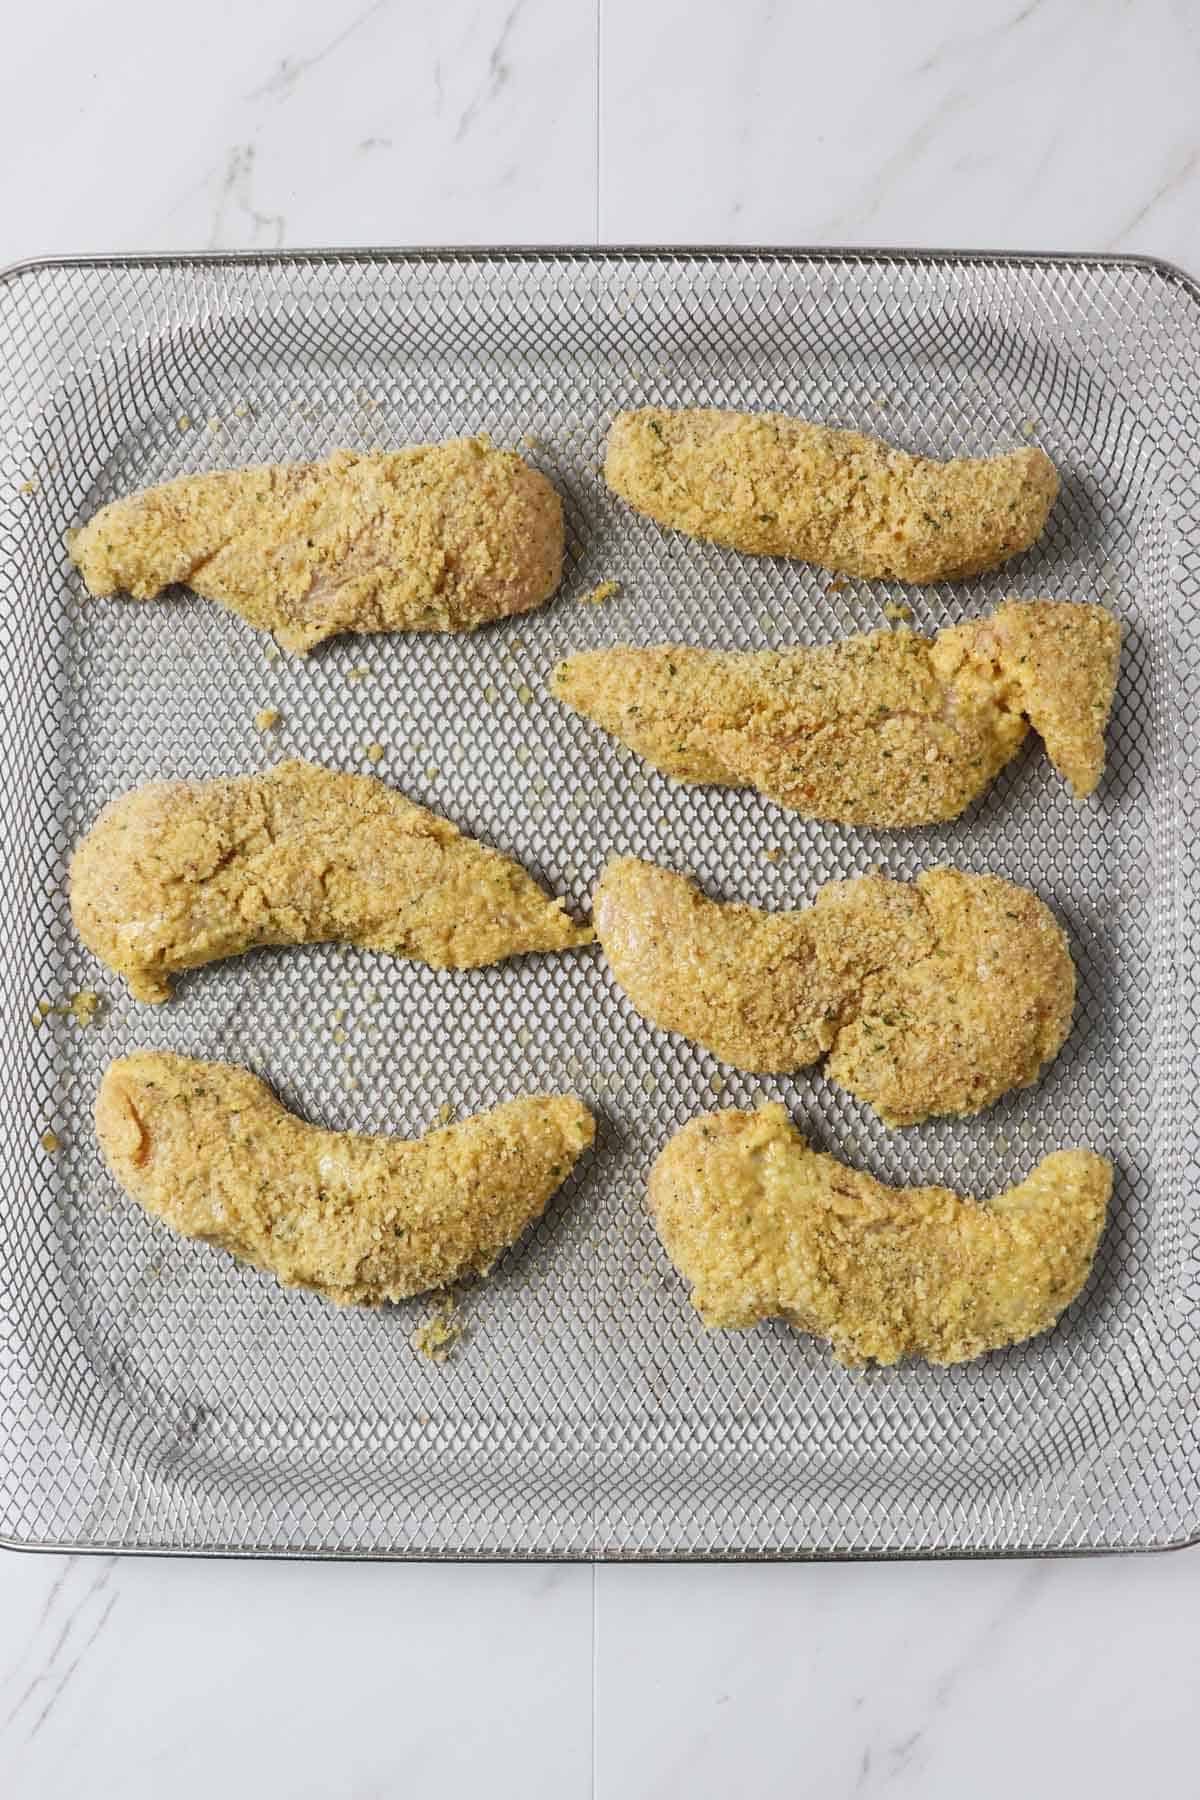 raw chicken tenders with breading in air fryer basket